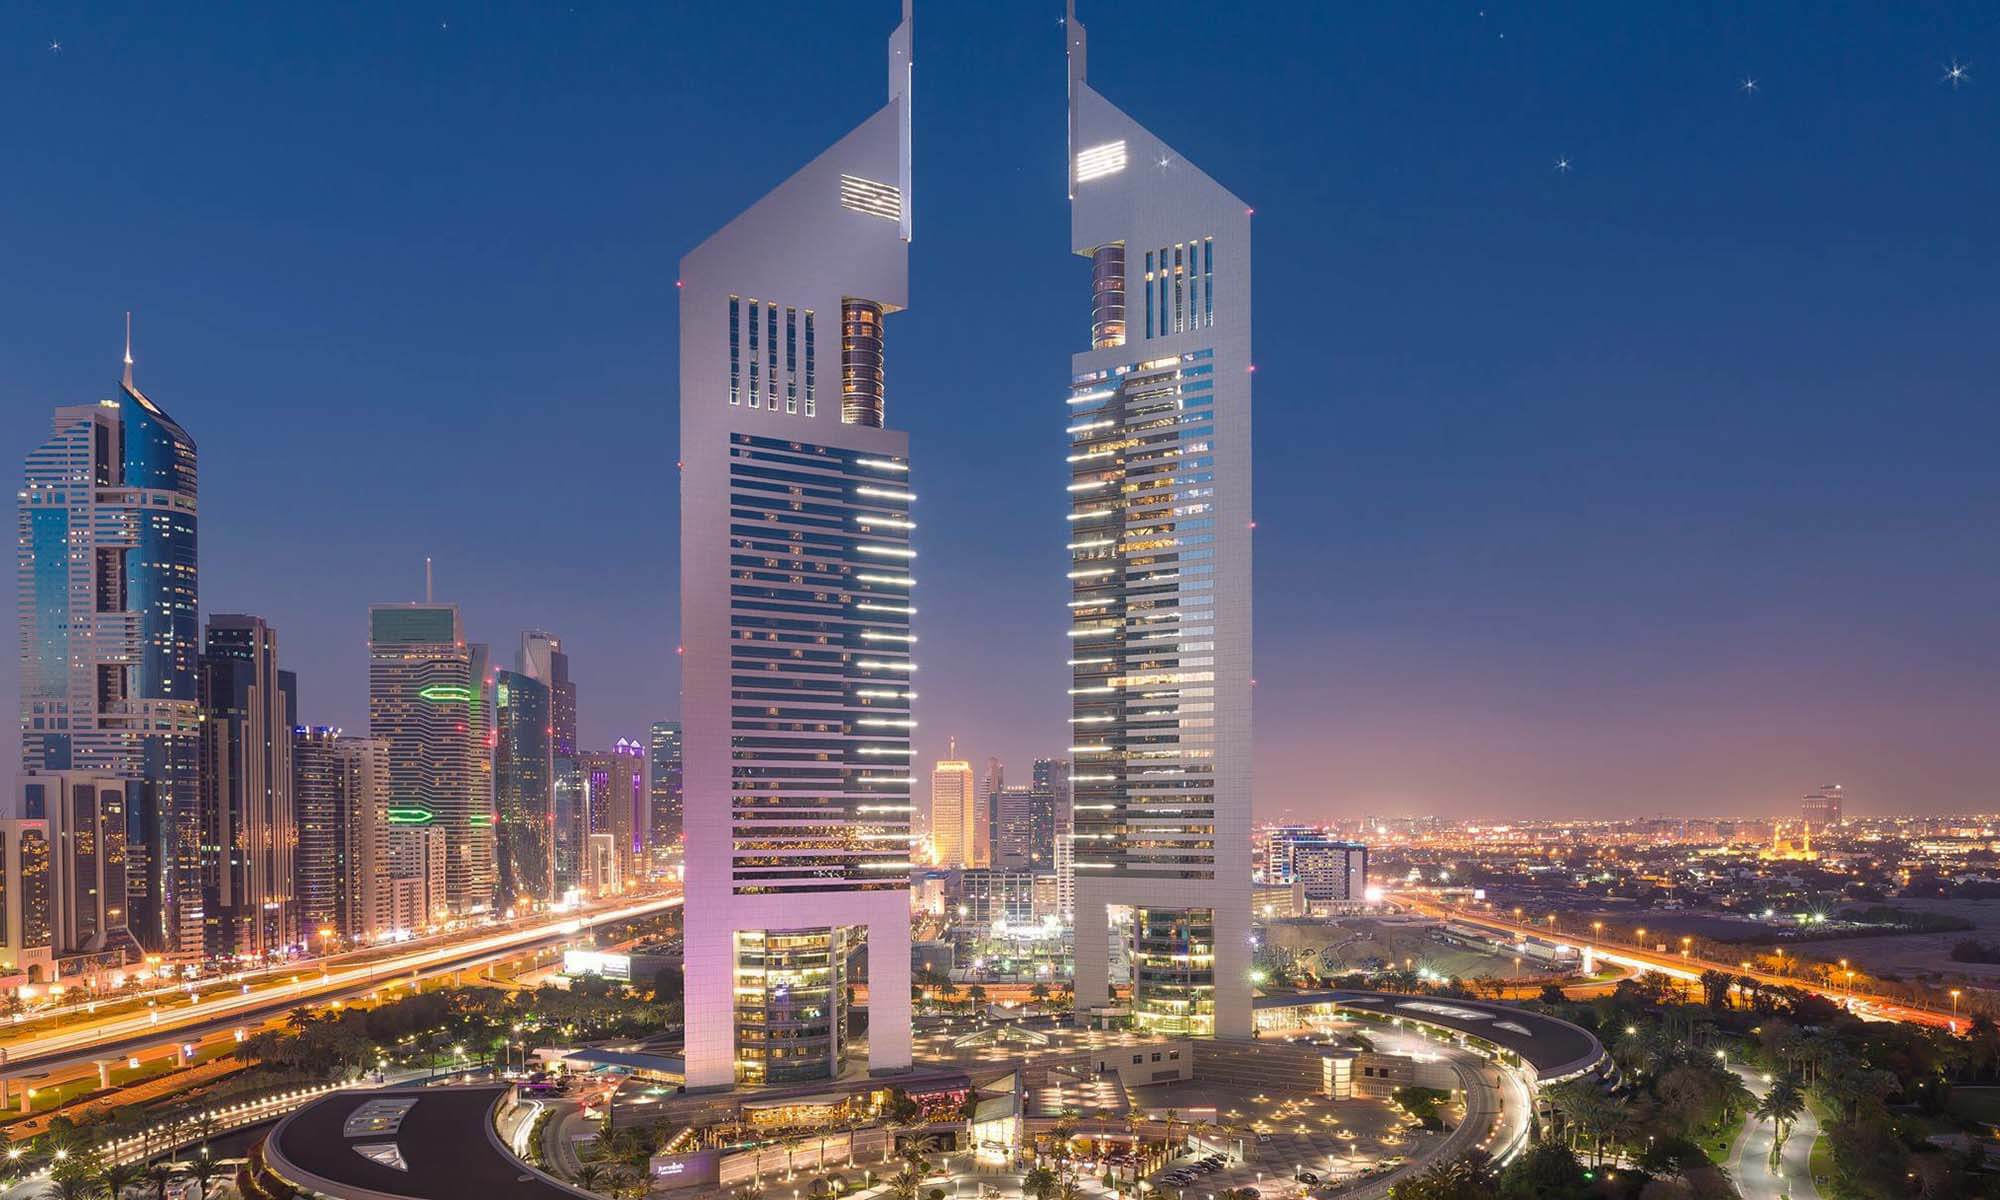 The Famous Building In Dubai - www.inf-inet.com